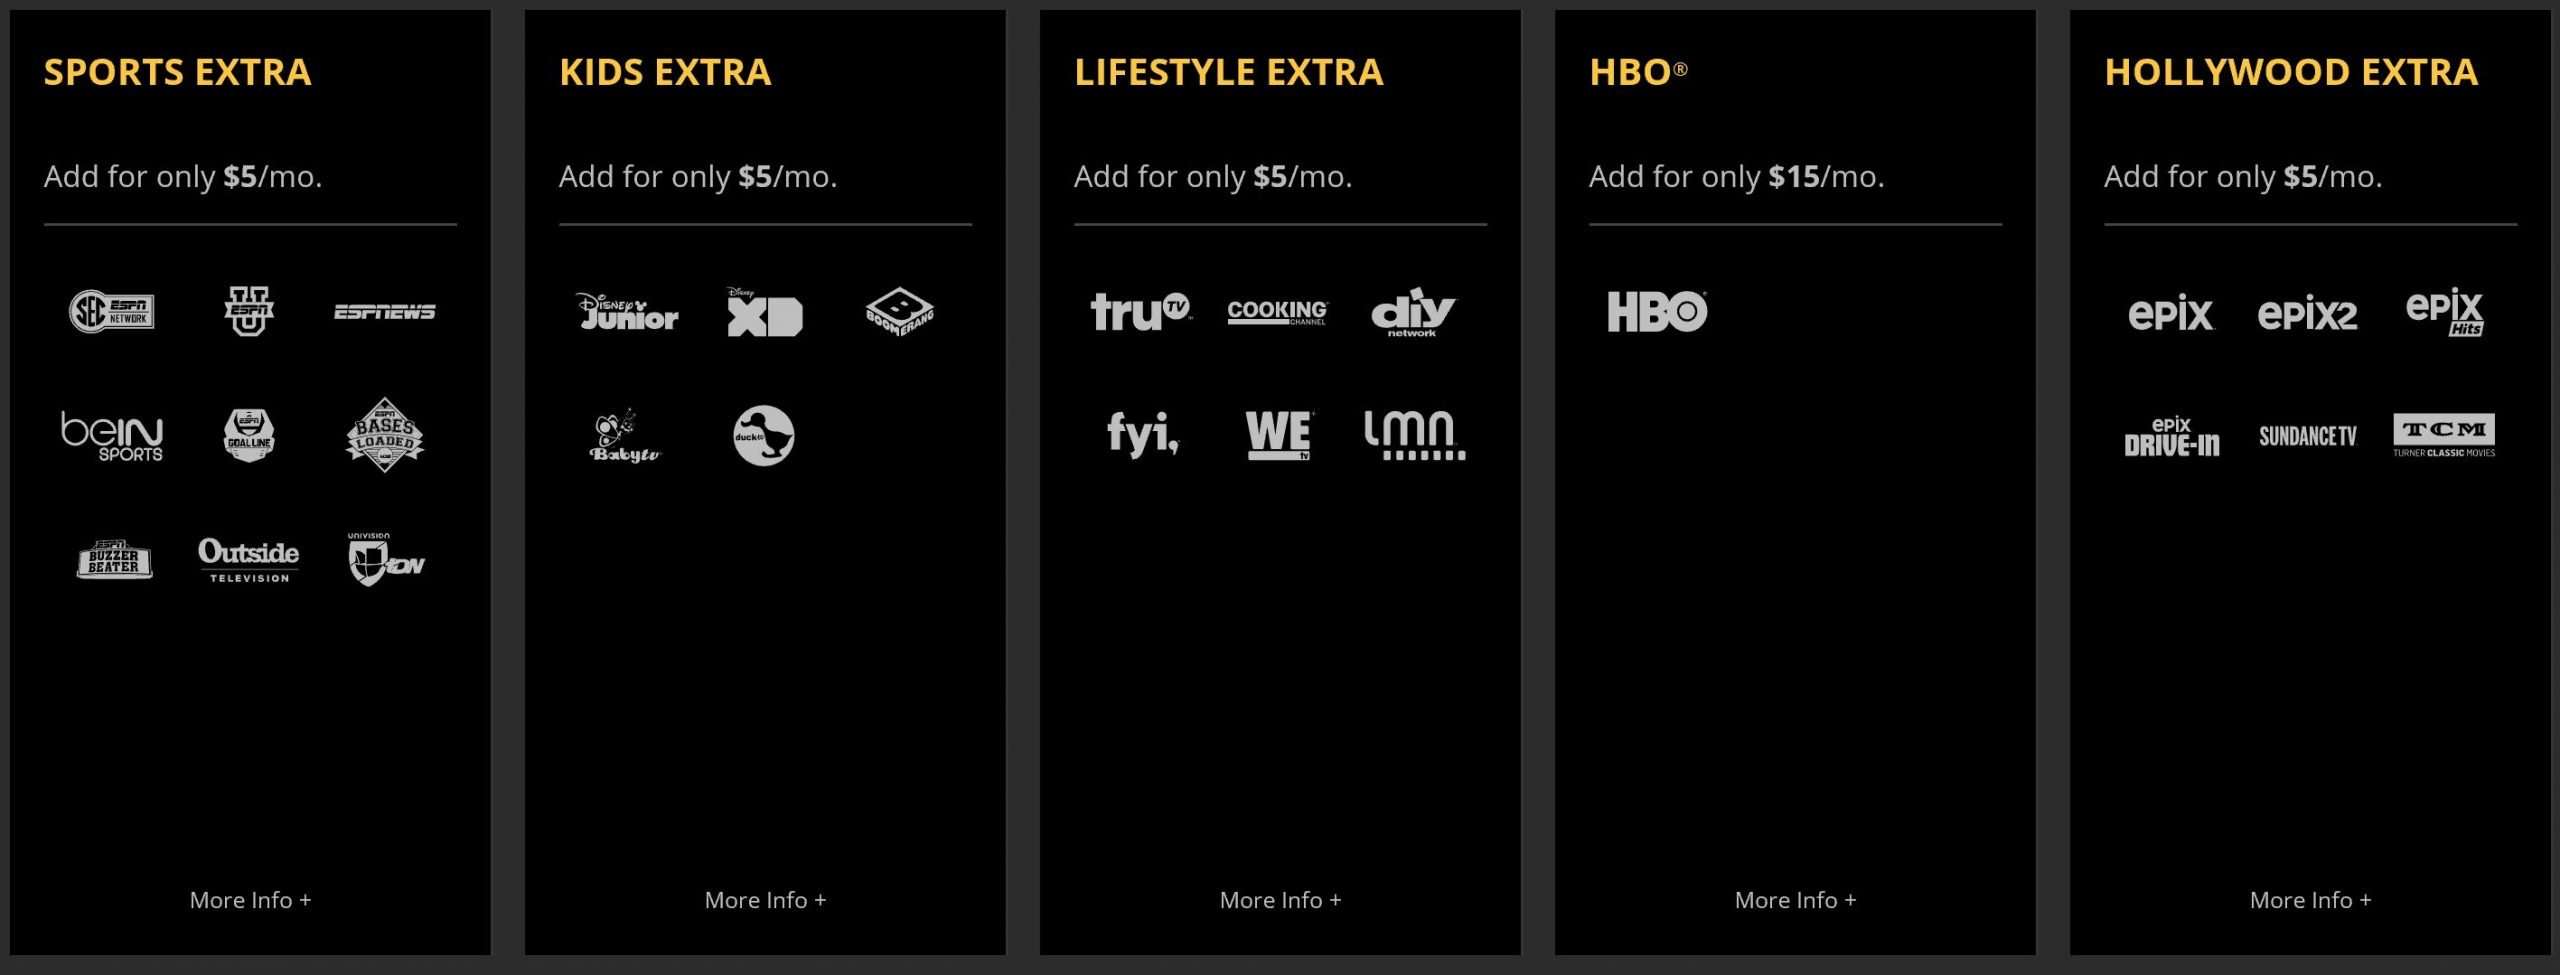 PlayStation Vue vs Sling TV: What You Need to Know